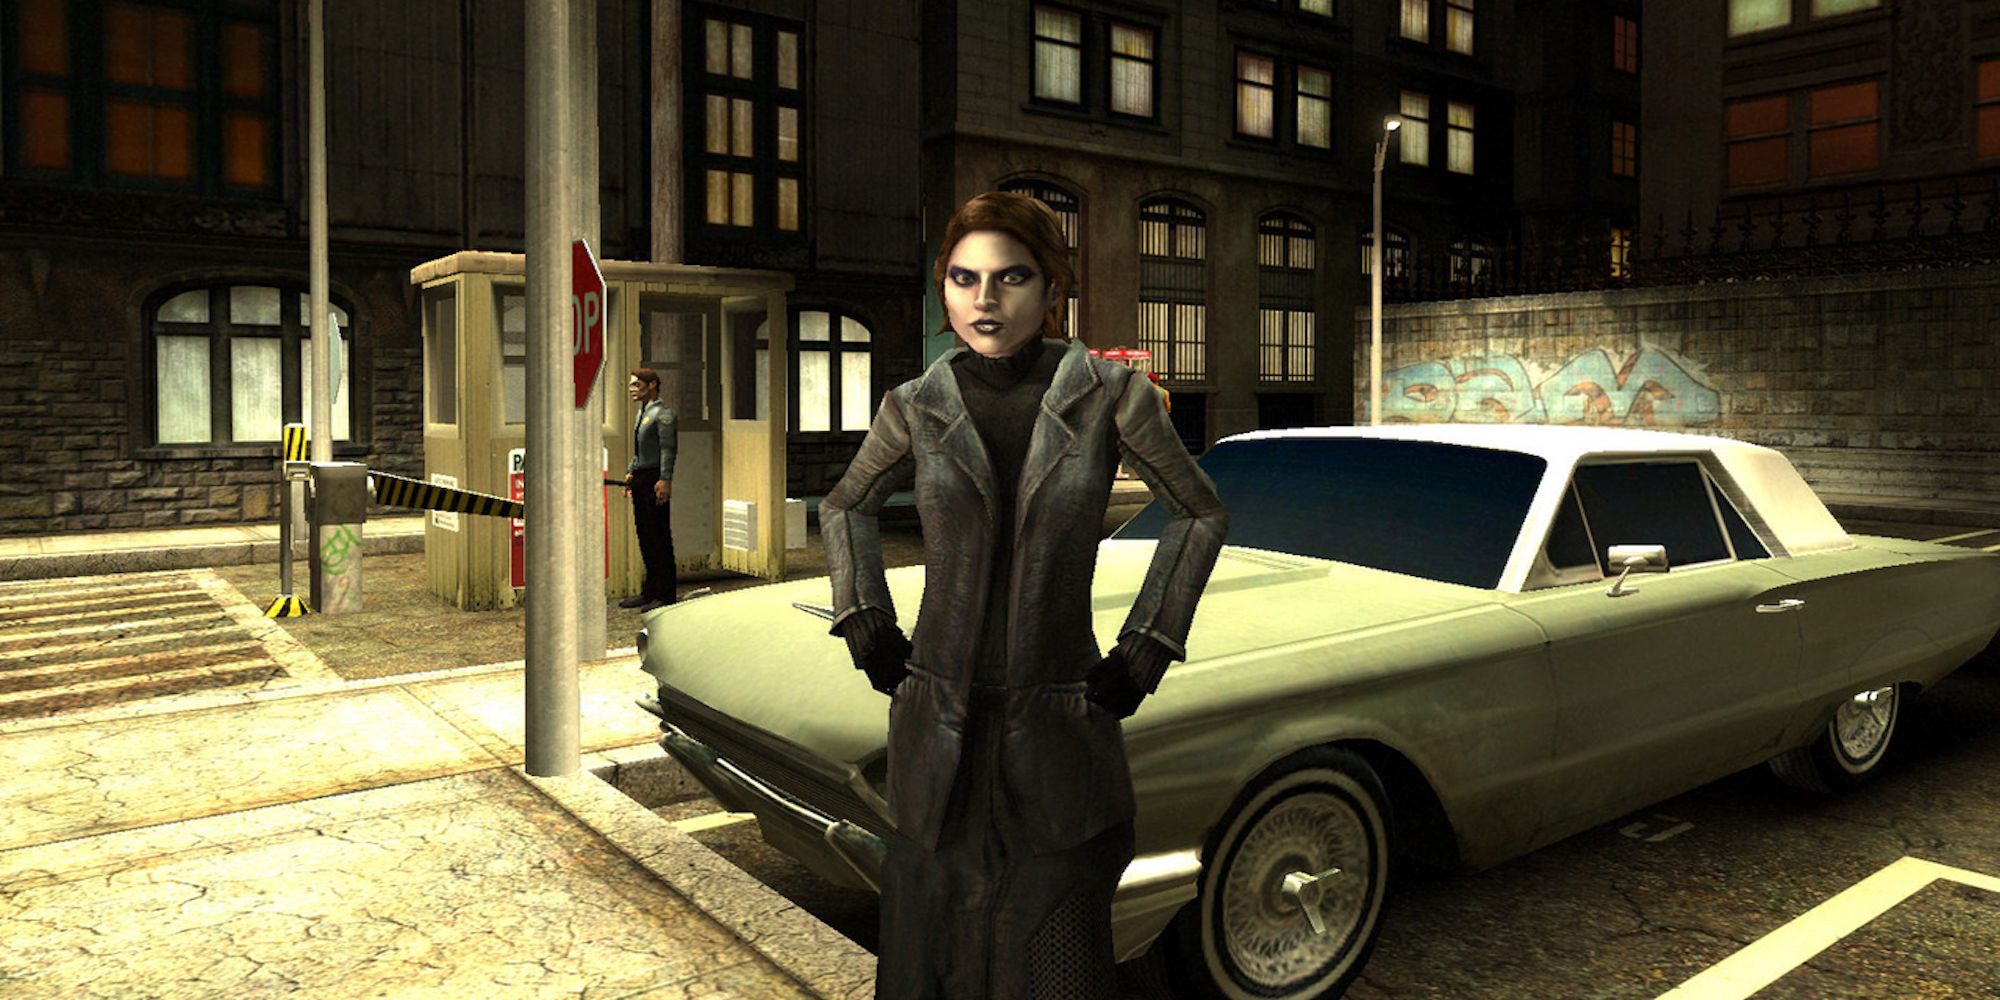 Character in a trench coat from Vampire: The Masquerade - Bloodlines